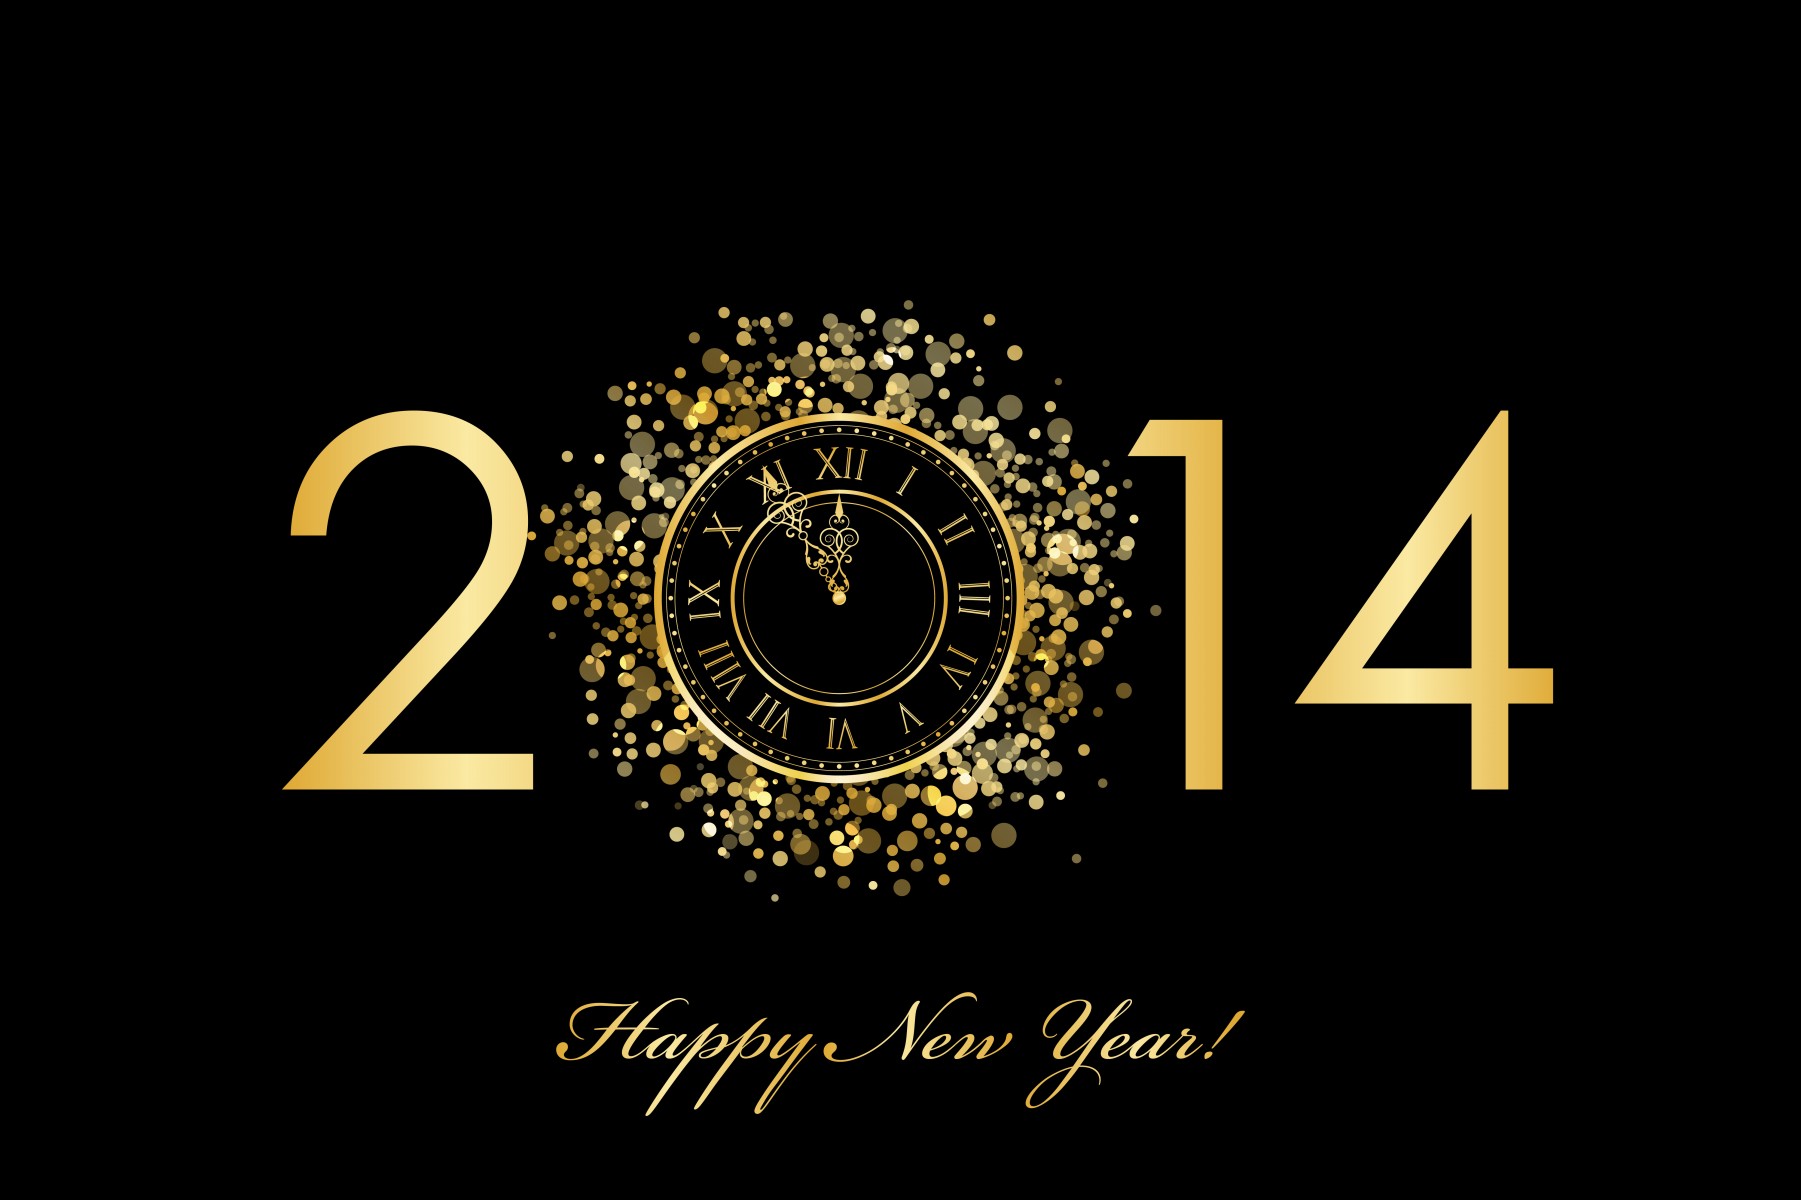 Happy New Year 2014 Gold HD Wallpapers Background Image